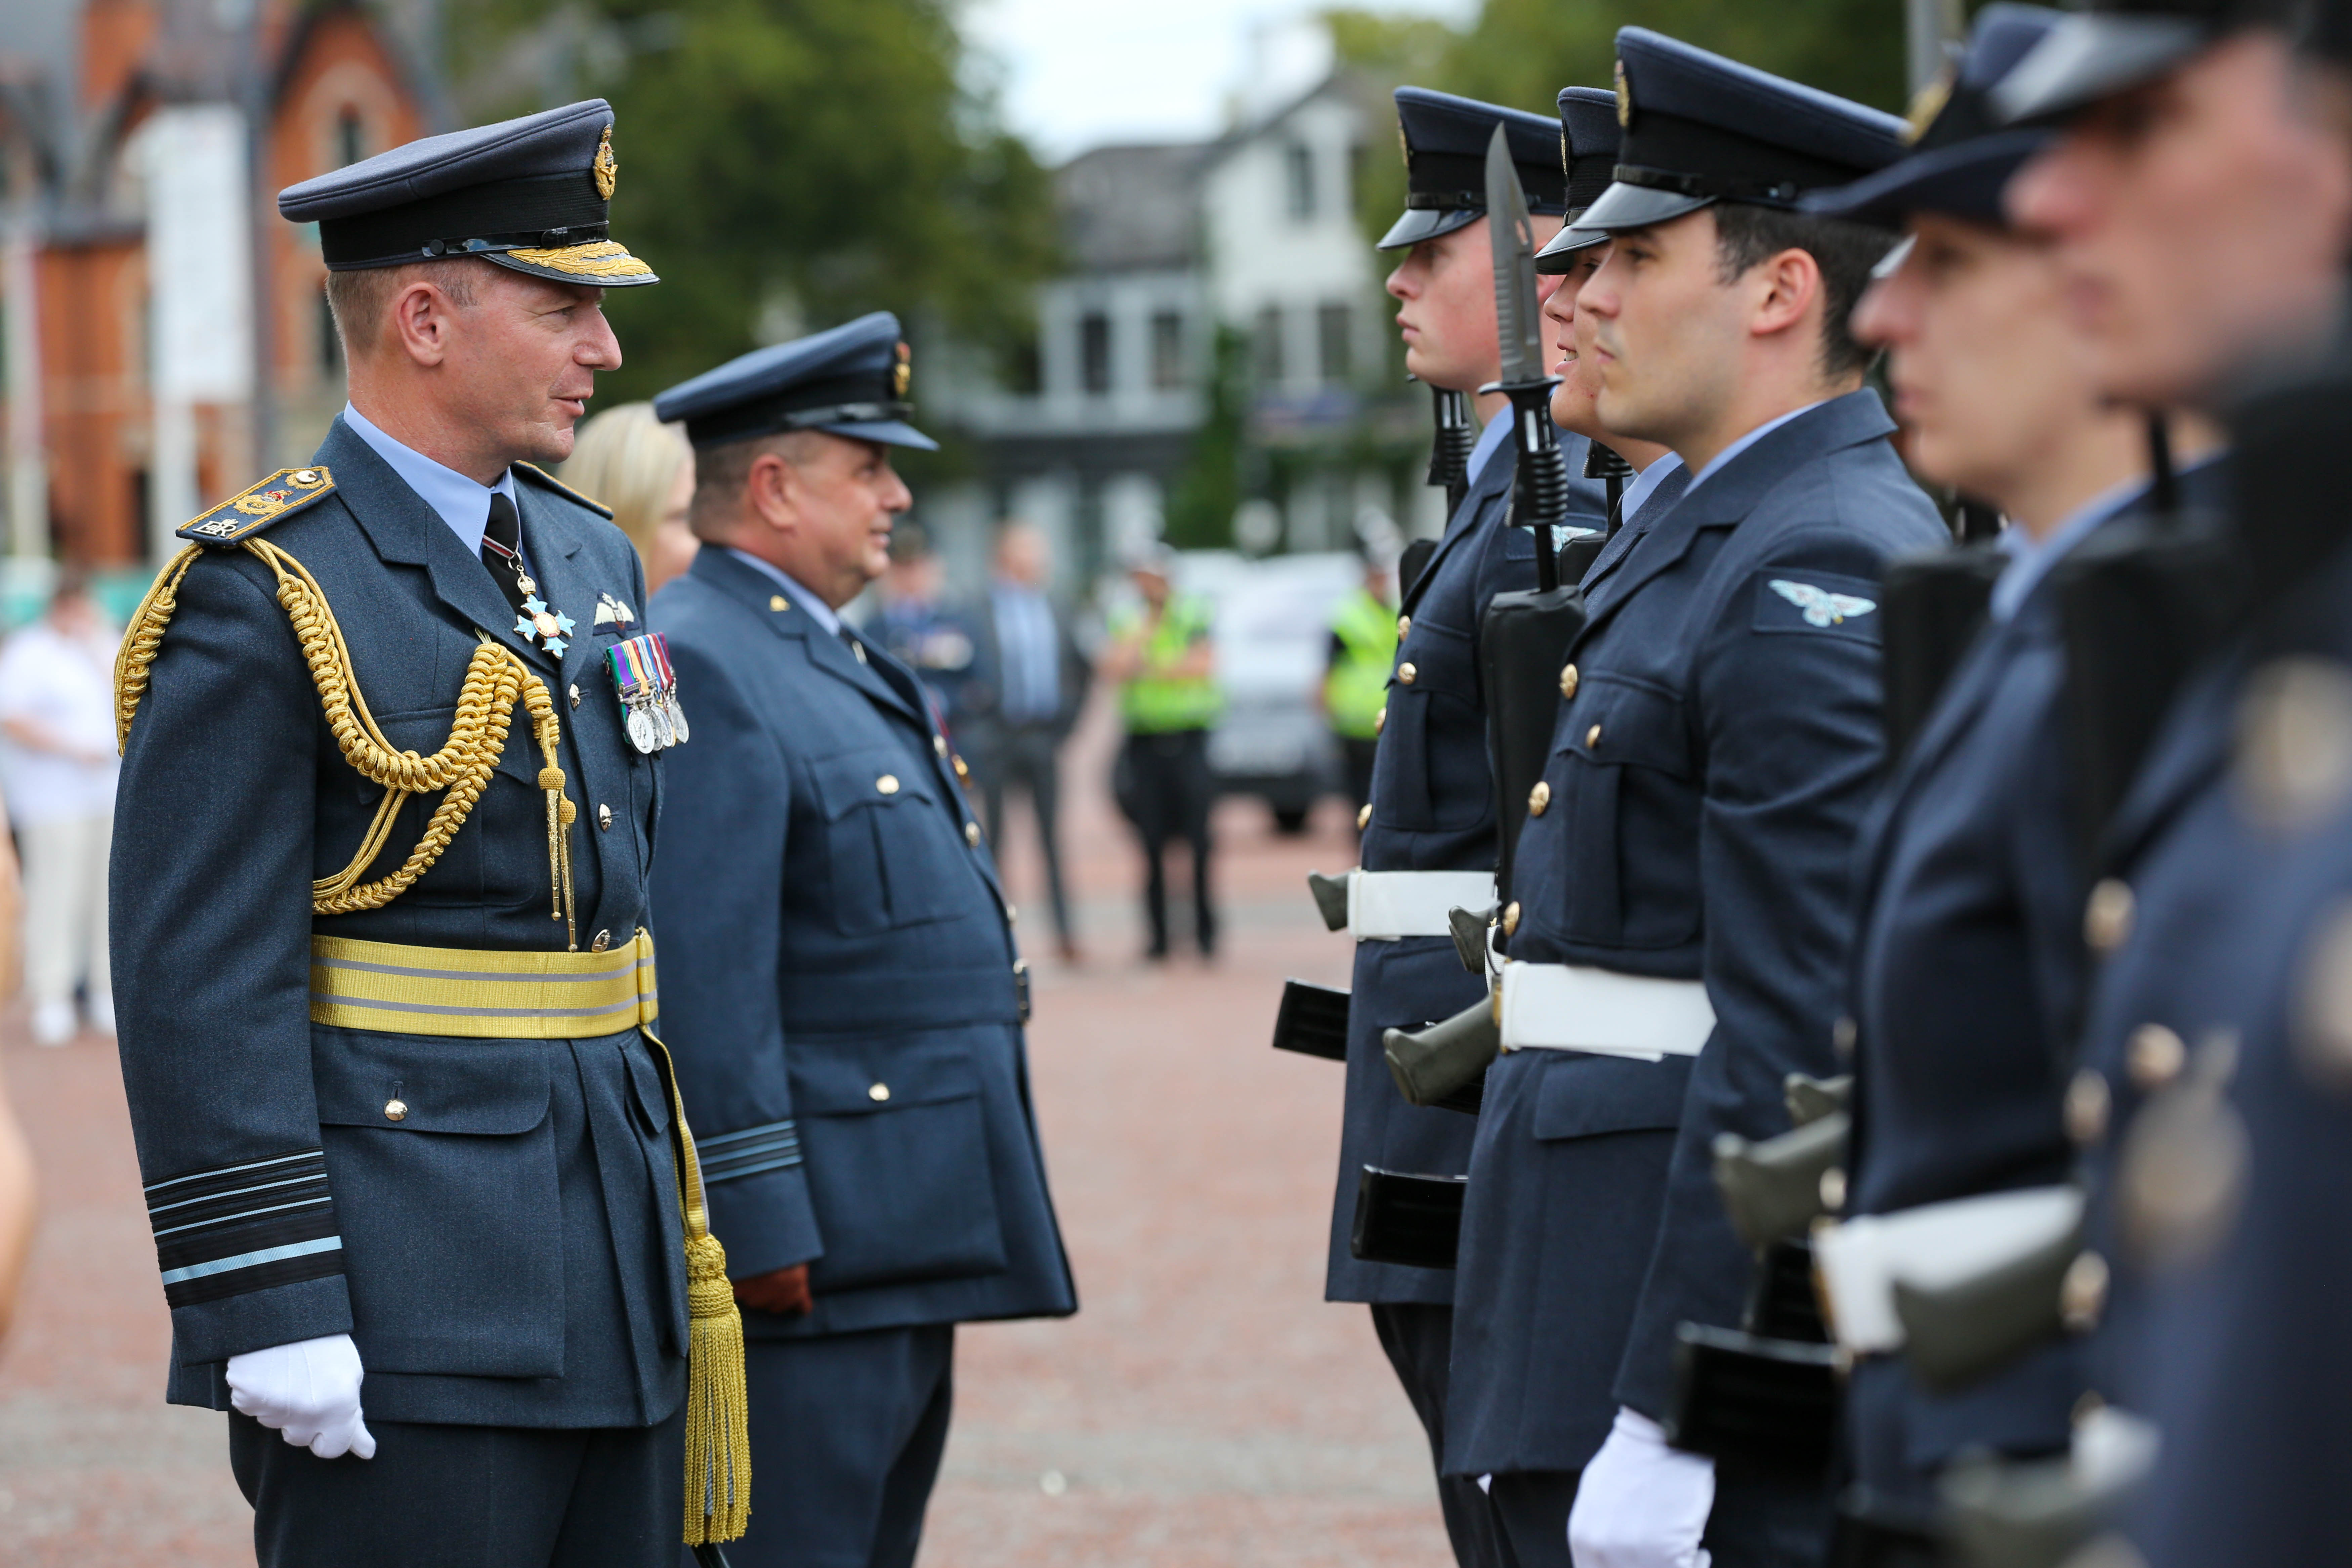 Air Chief Marshal Sir Mike Wigston talks to personnel in line at parade.